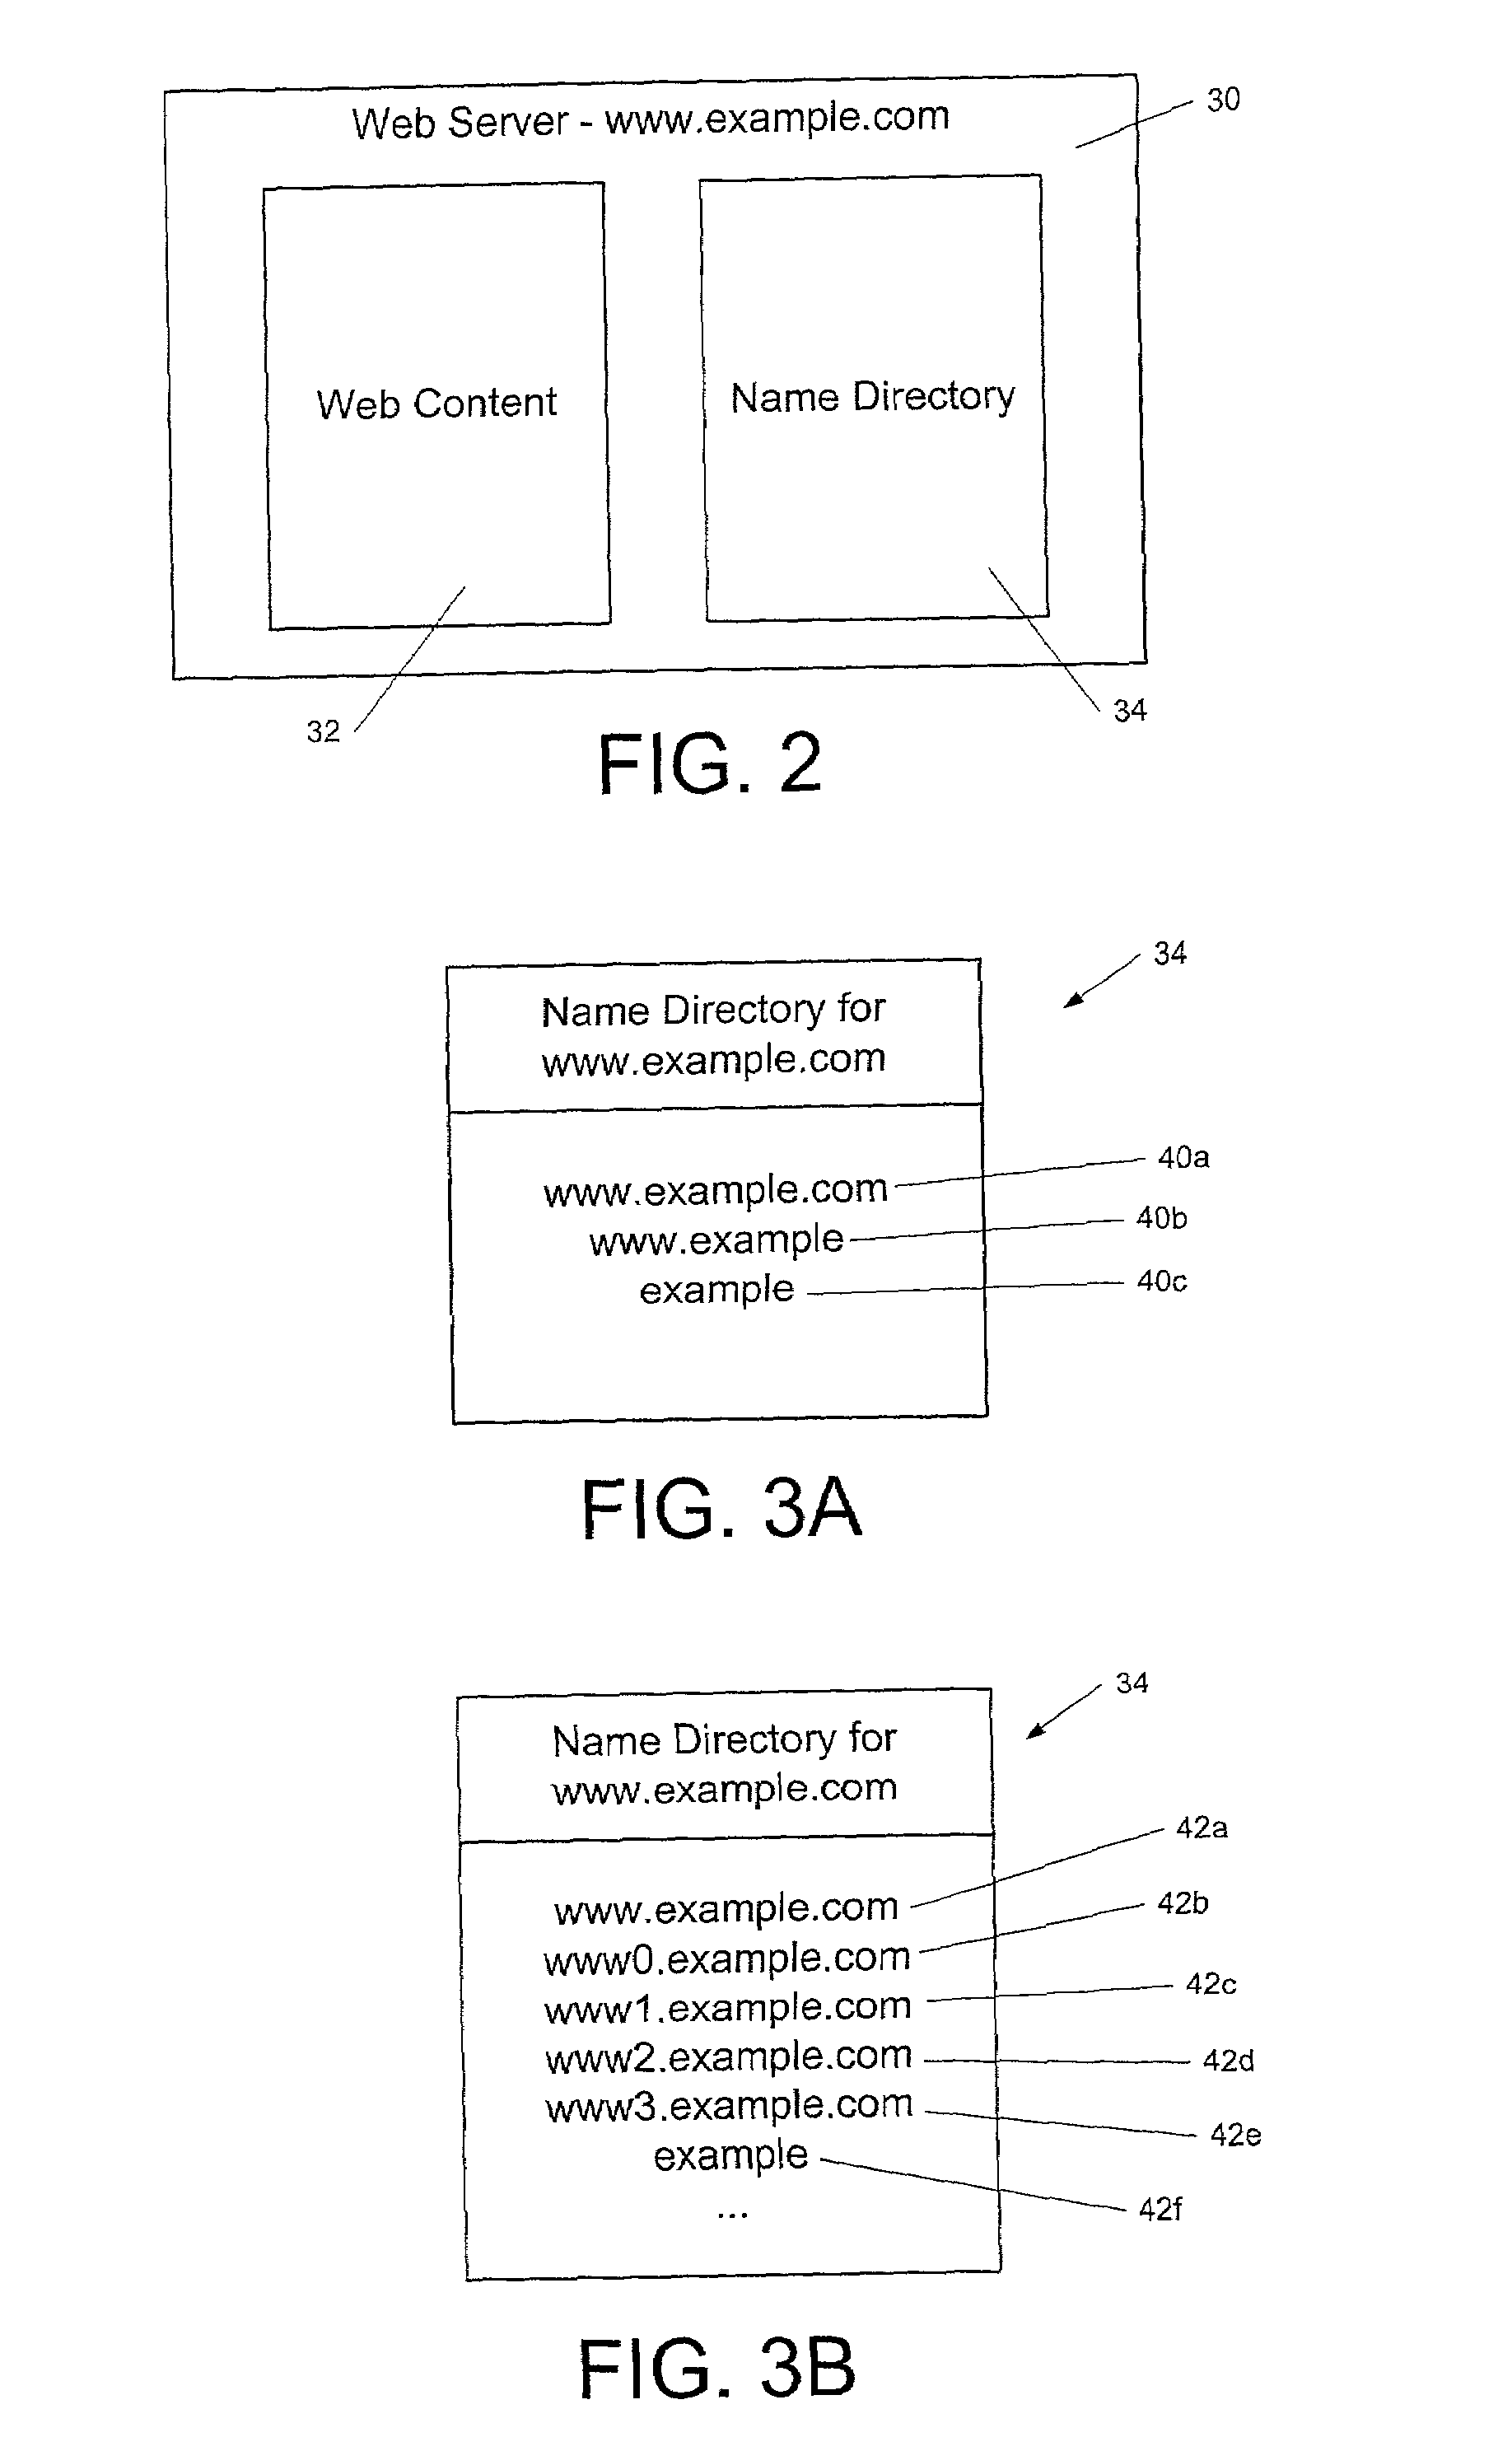 System and methods for securely permitting mobile code to access resources over a network